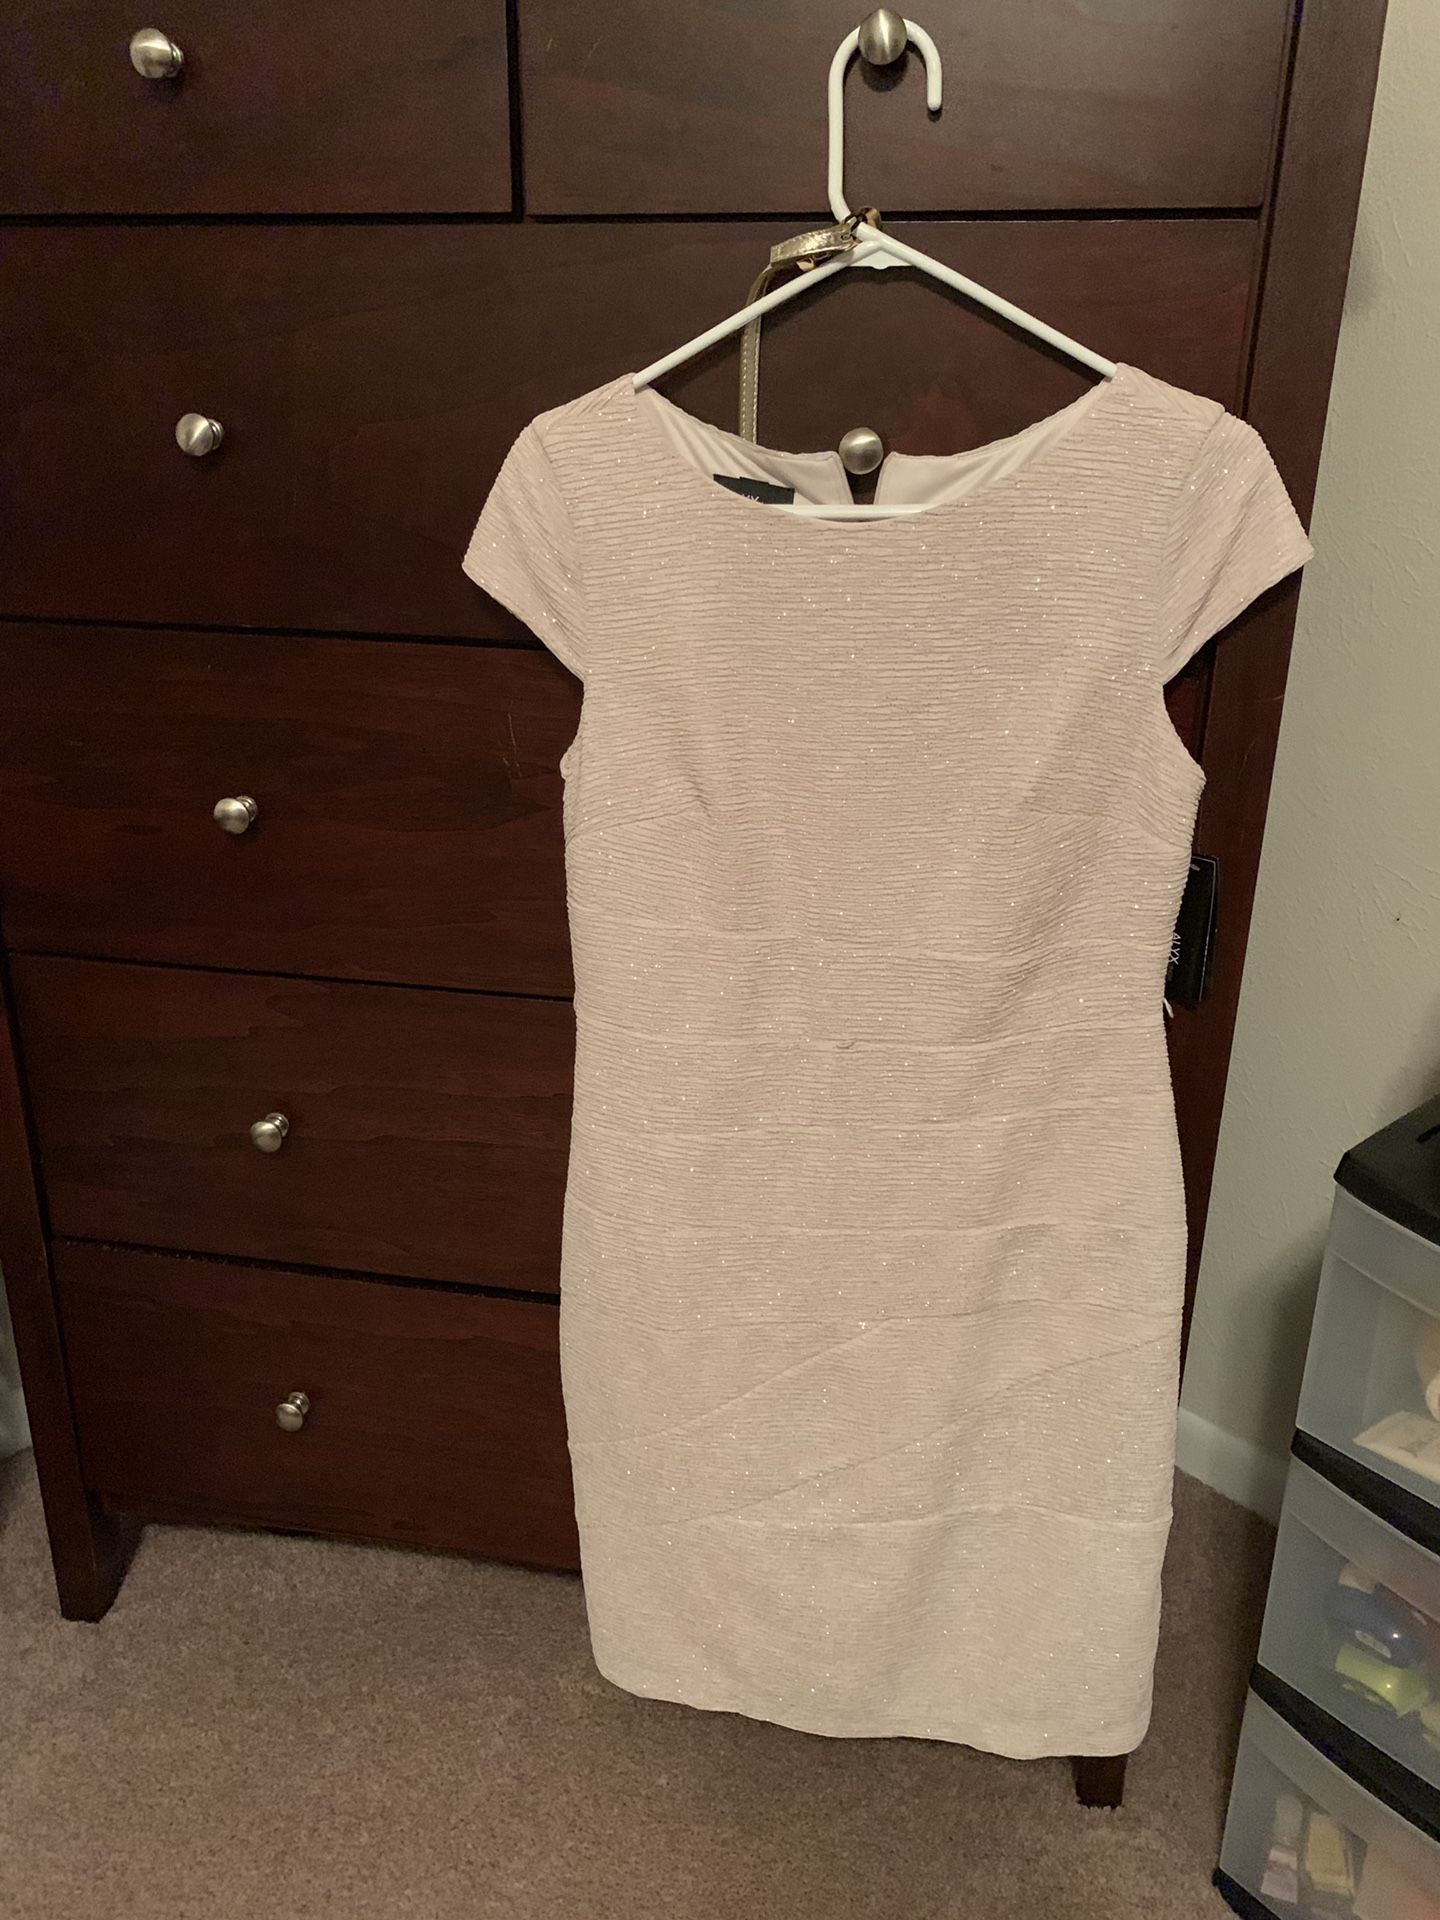 Dress - size 6 - new with tags